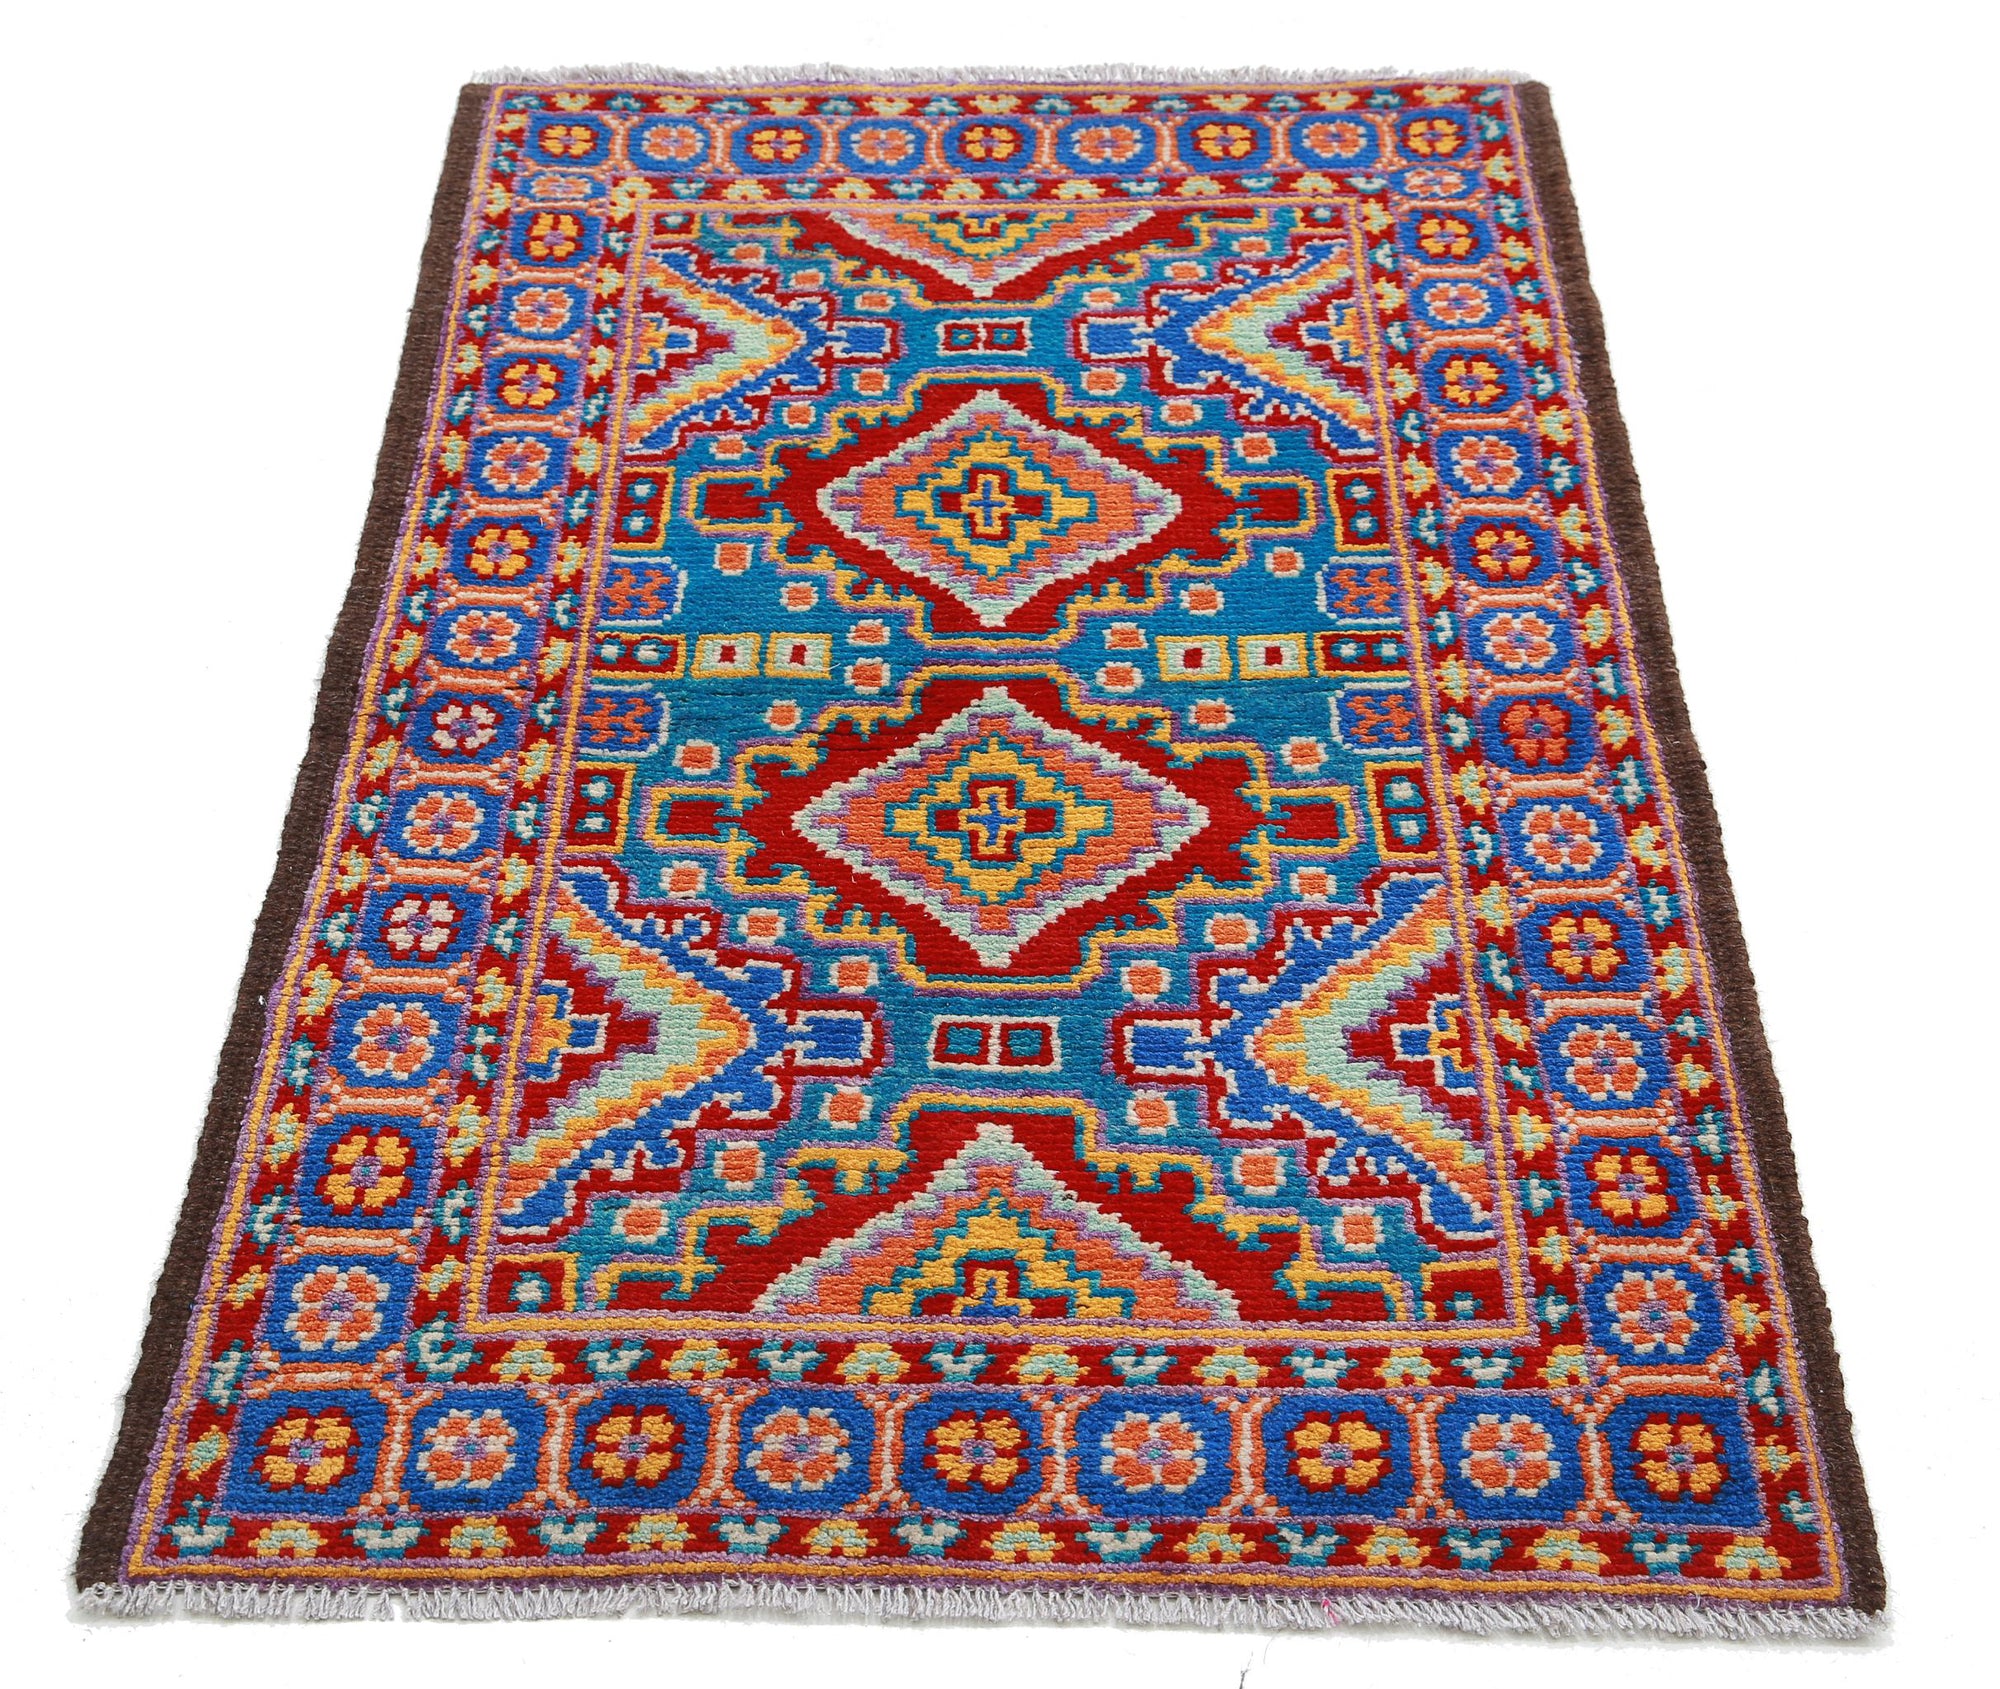 Revival-hand-knotted-qarghani-wool-rug-5014193-3.jpg